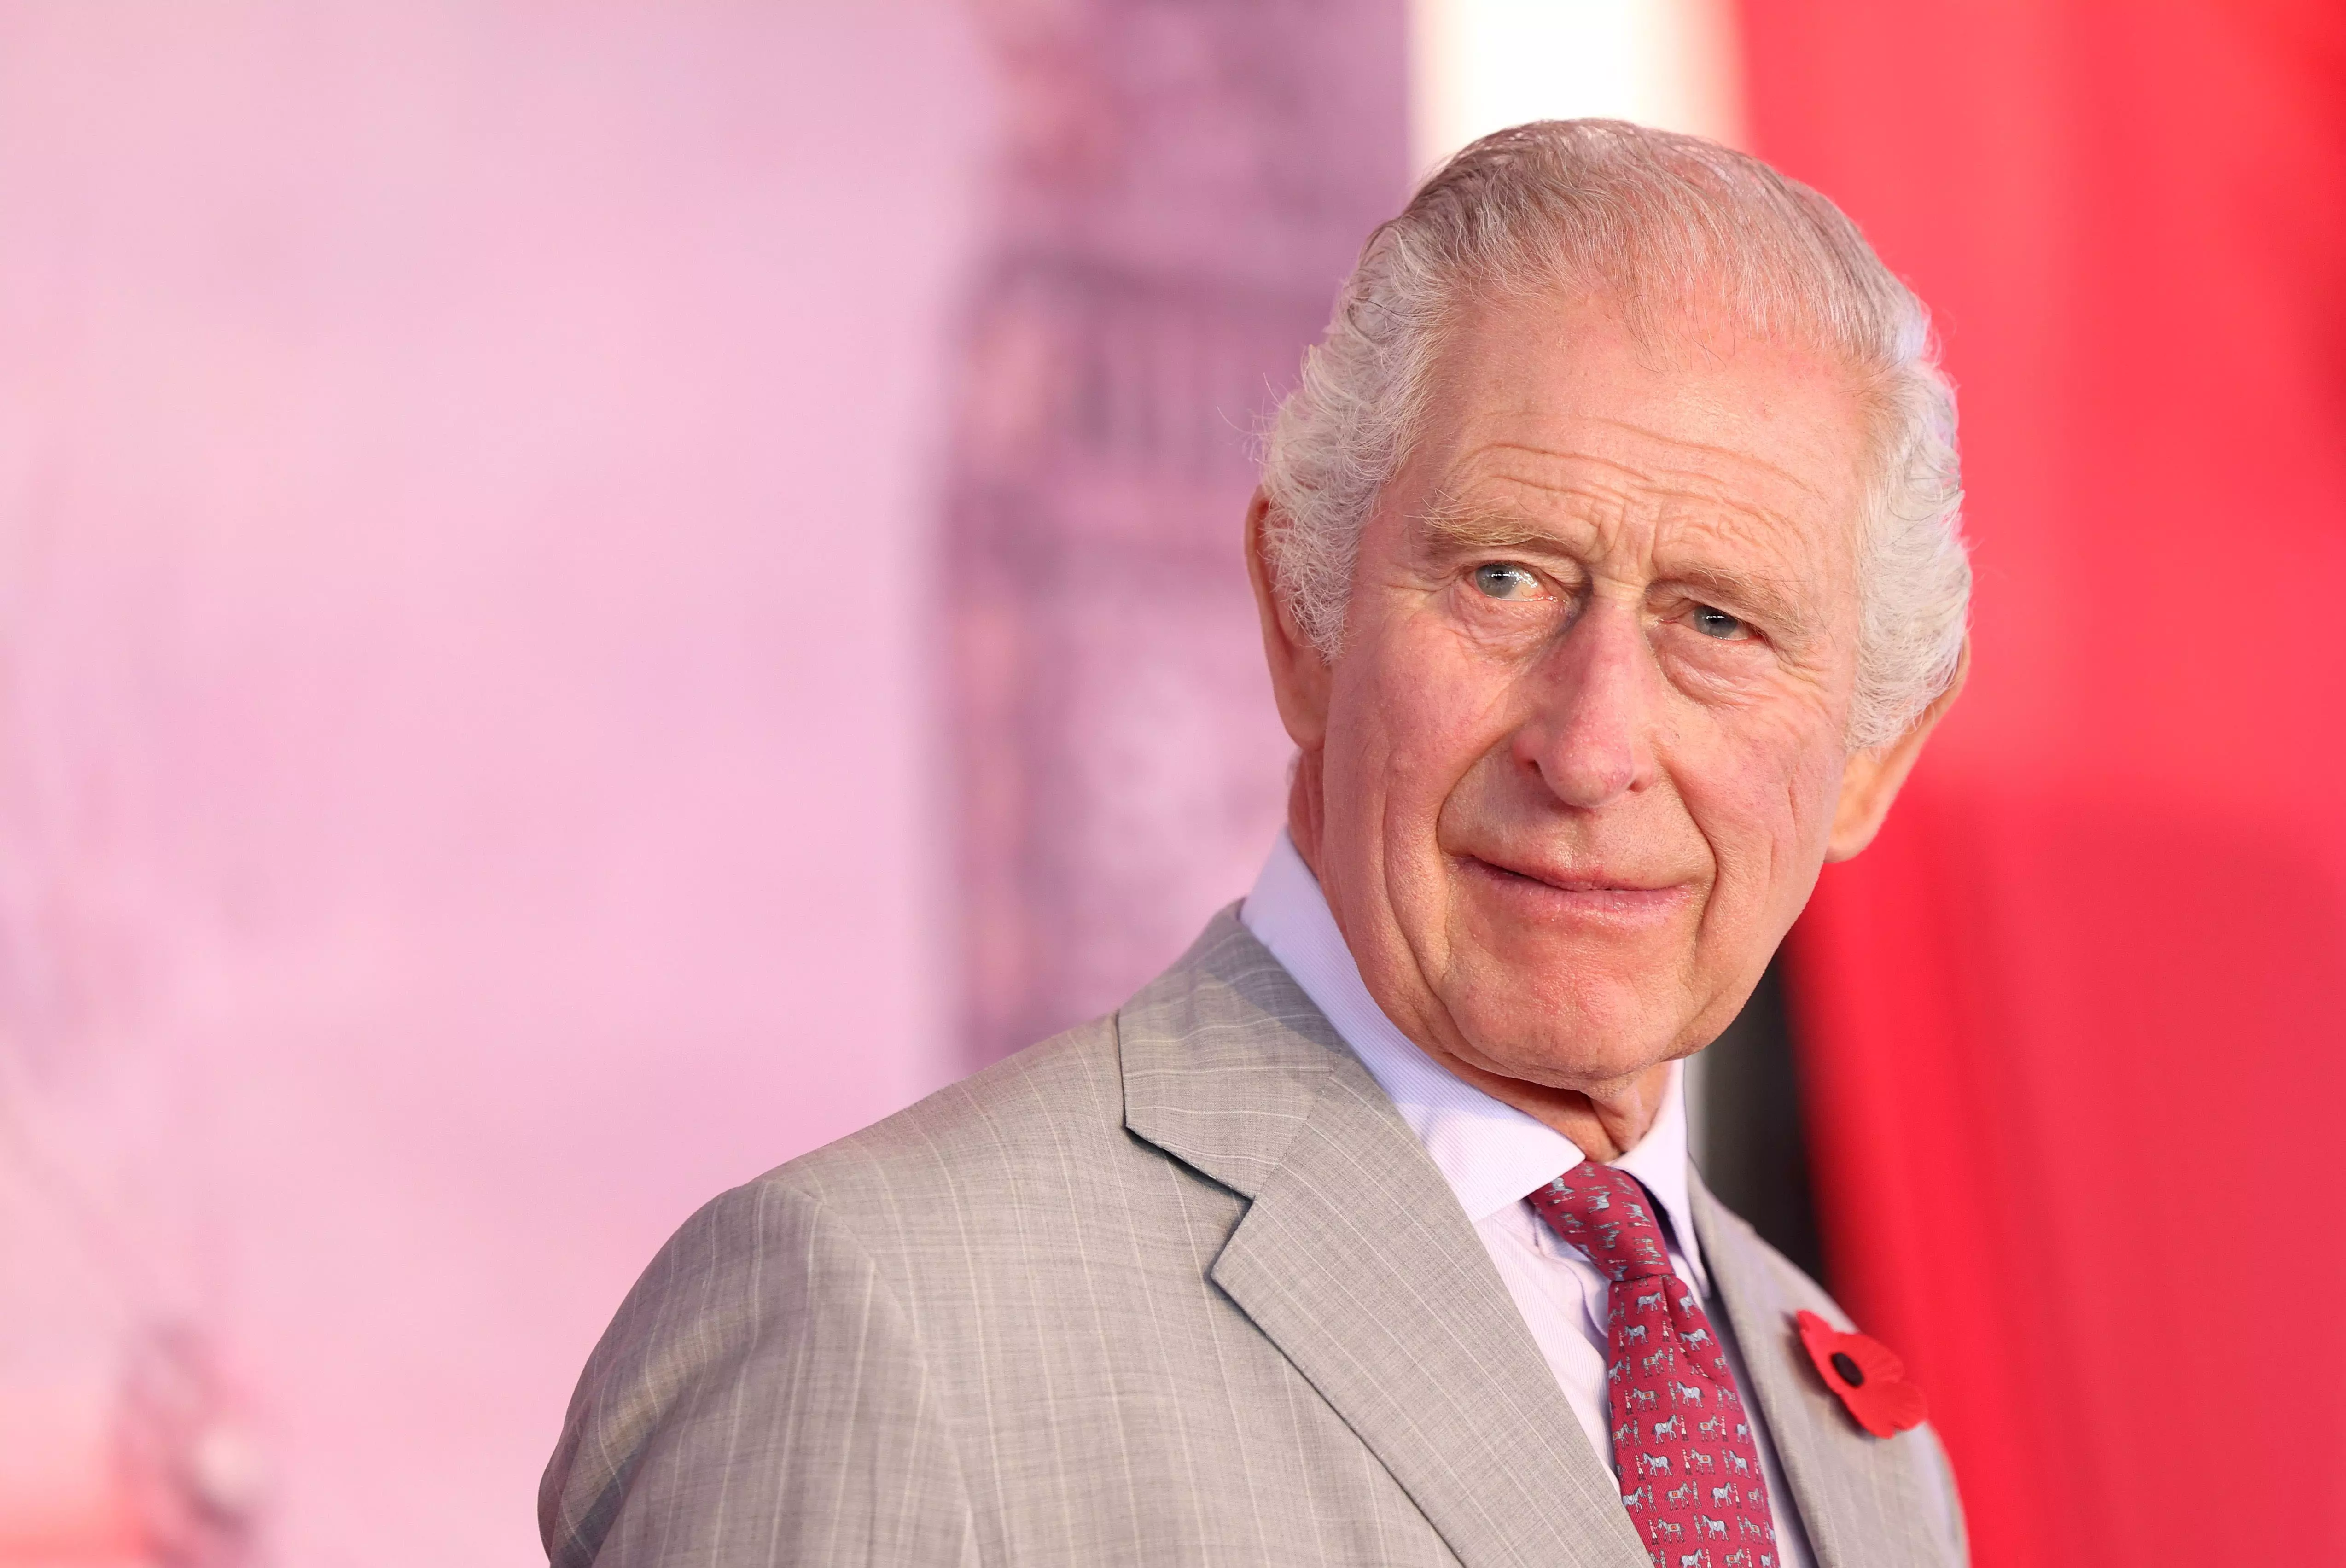 King Charles III diagnosed with cancer, receiving treatment